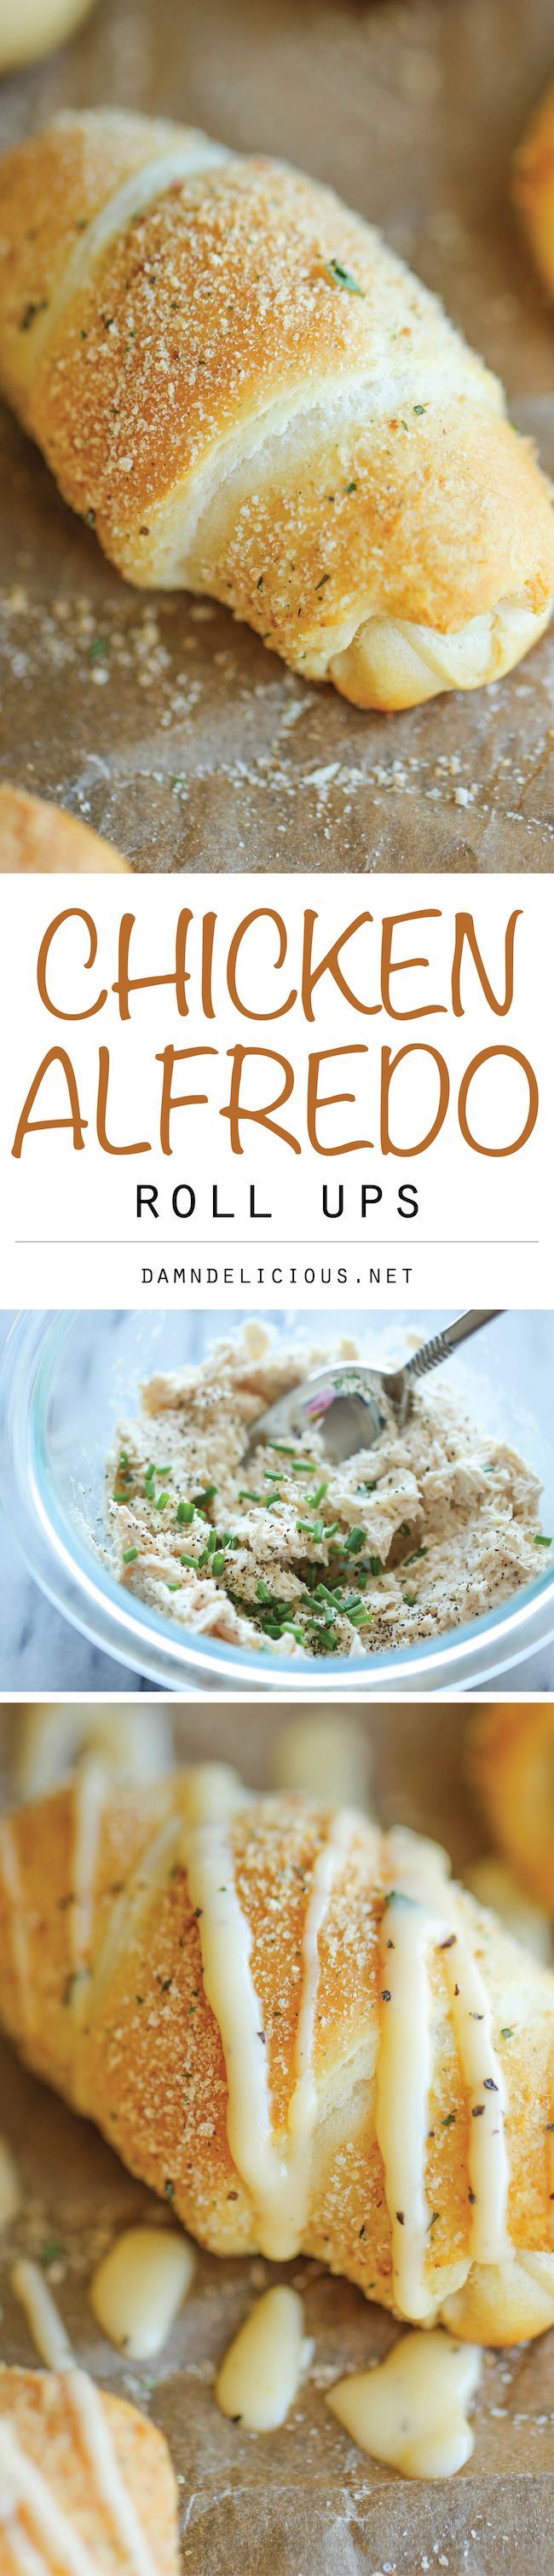 Chicken Alfredo Roll Ups – The easiest, no-fuss chicken alfredo you will ever make, conveniently stuffed in the butteriest roll